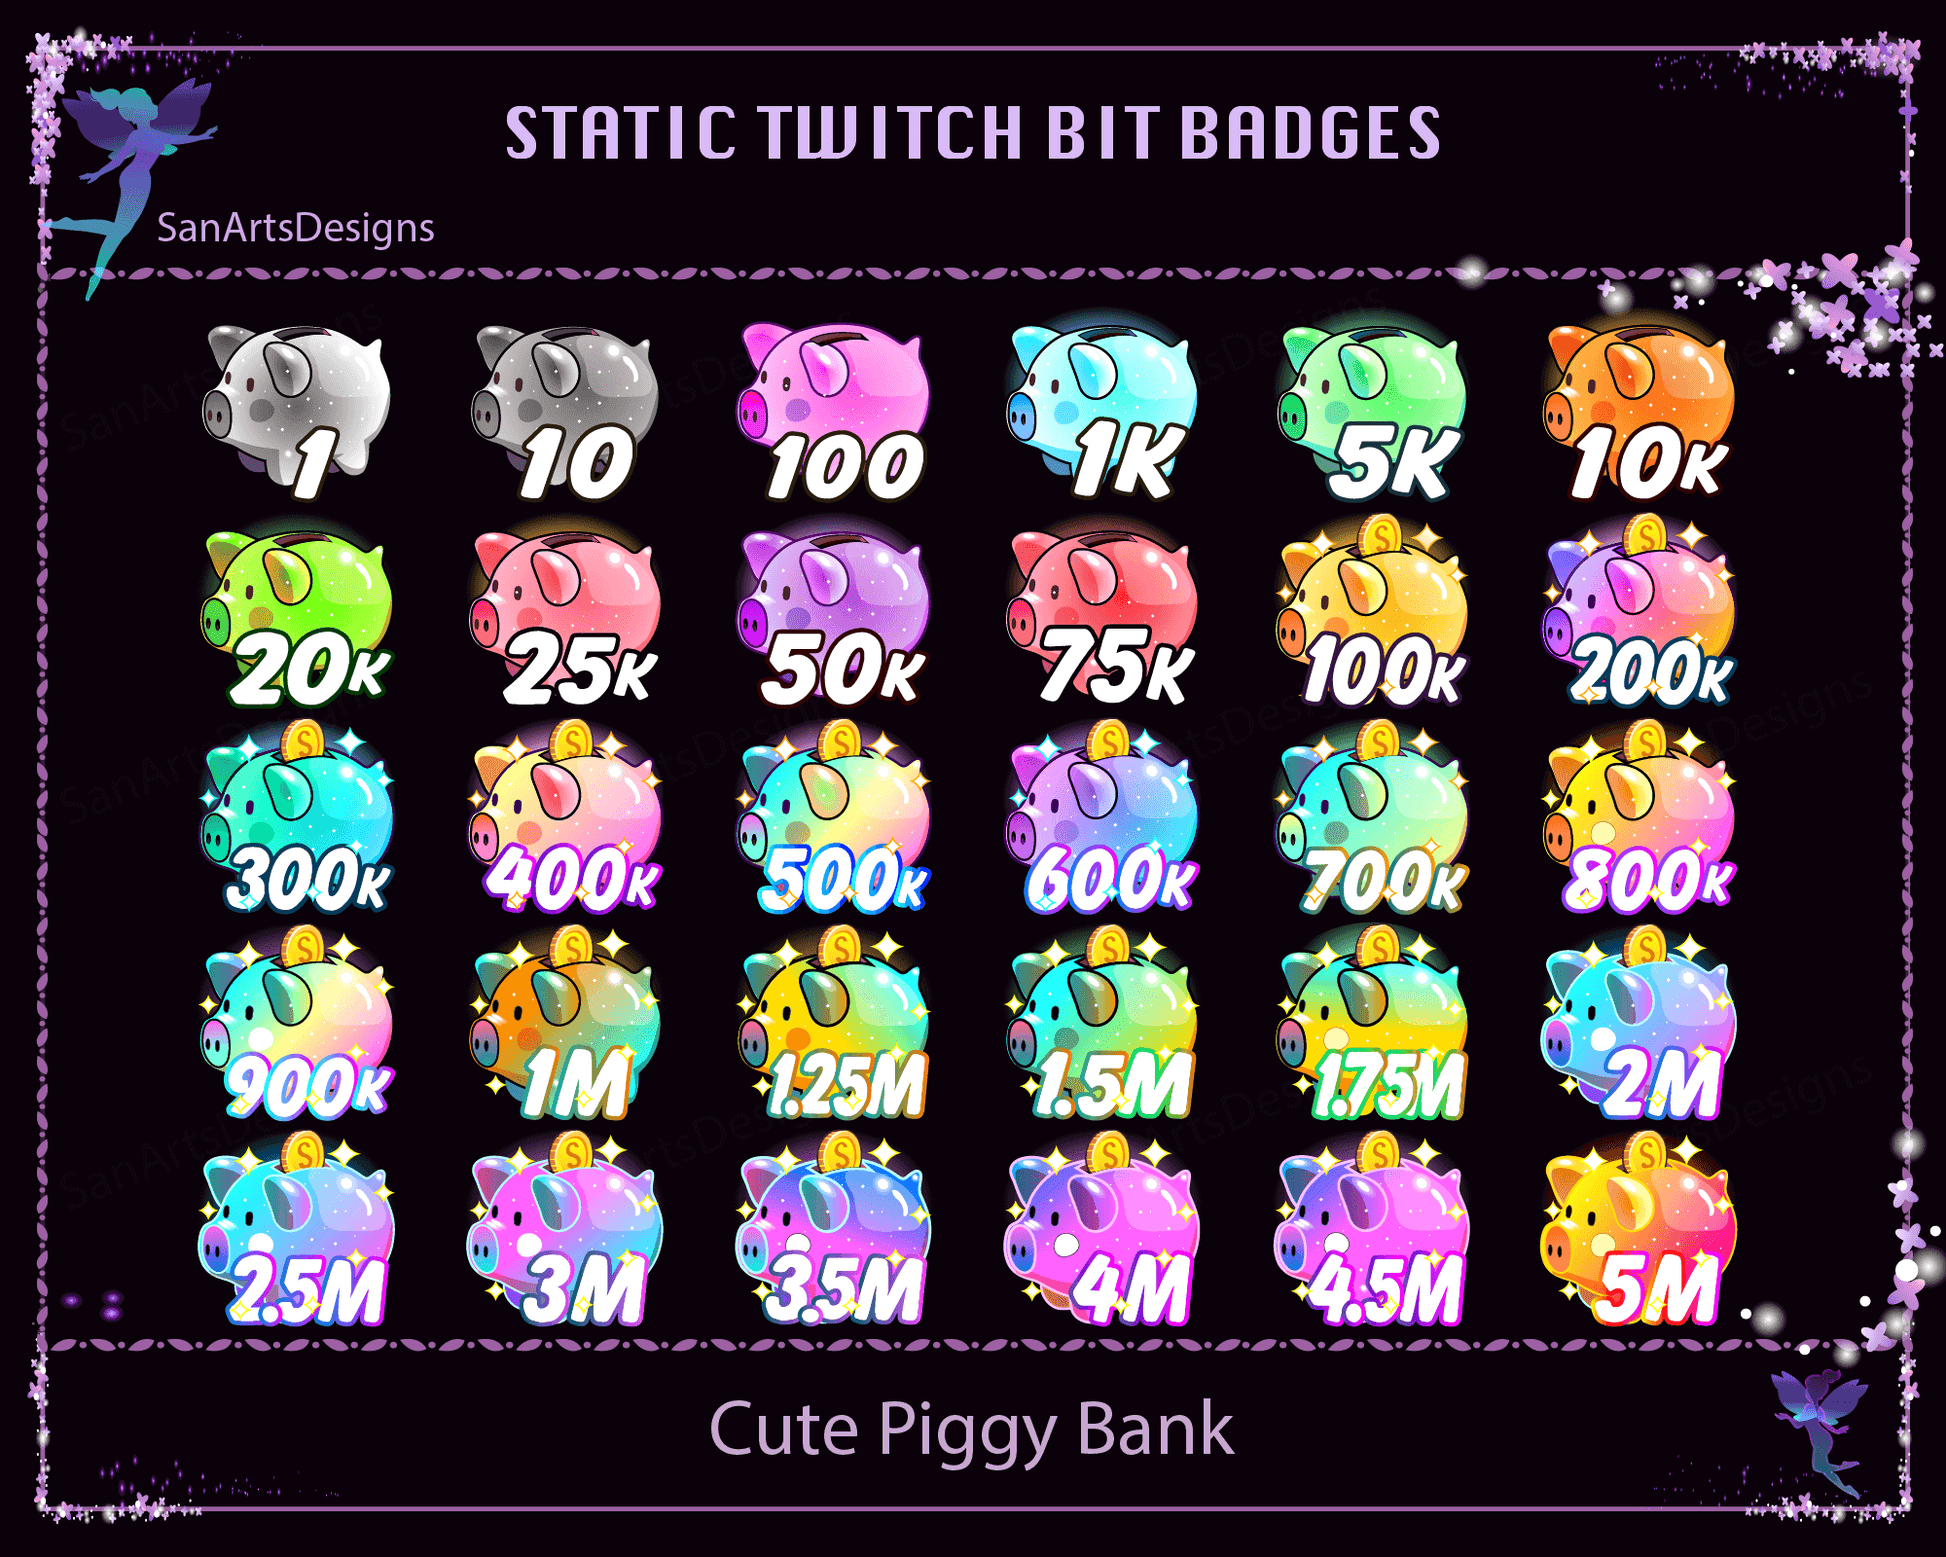 28 Twitch Bit Badges Numbers, Twitch Sub Badges, Twitch Bit Emotes, Bit  Badges With Numbers, Streaming Badges, Cheer Badges